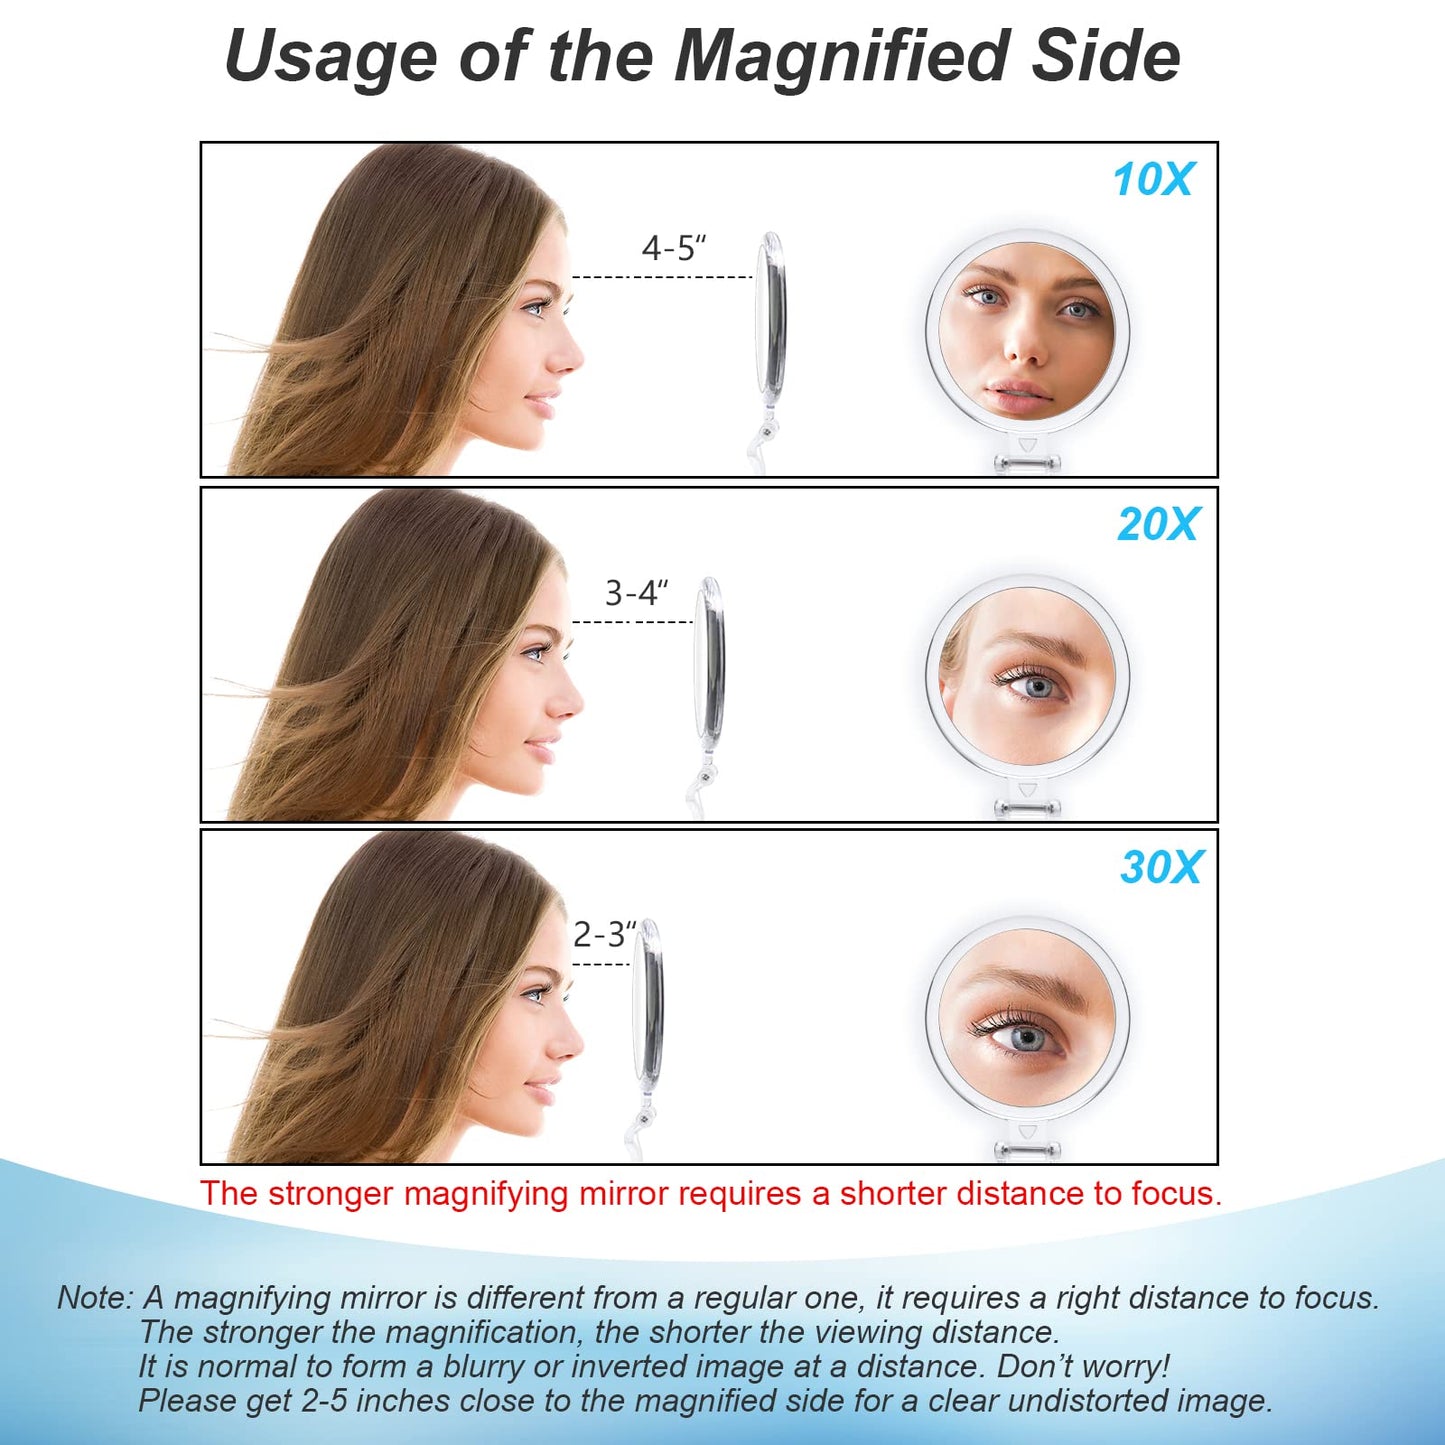 AMISCE 20x Magnifying Mirror, Travel Handheld Mirror - 2-Sided with 1X 20X Magnification Adjustable Handle, Portable, Small, Girl Women Mother's Gift